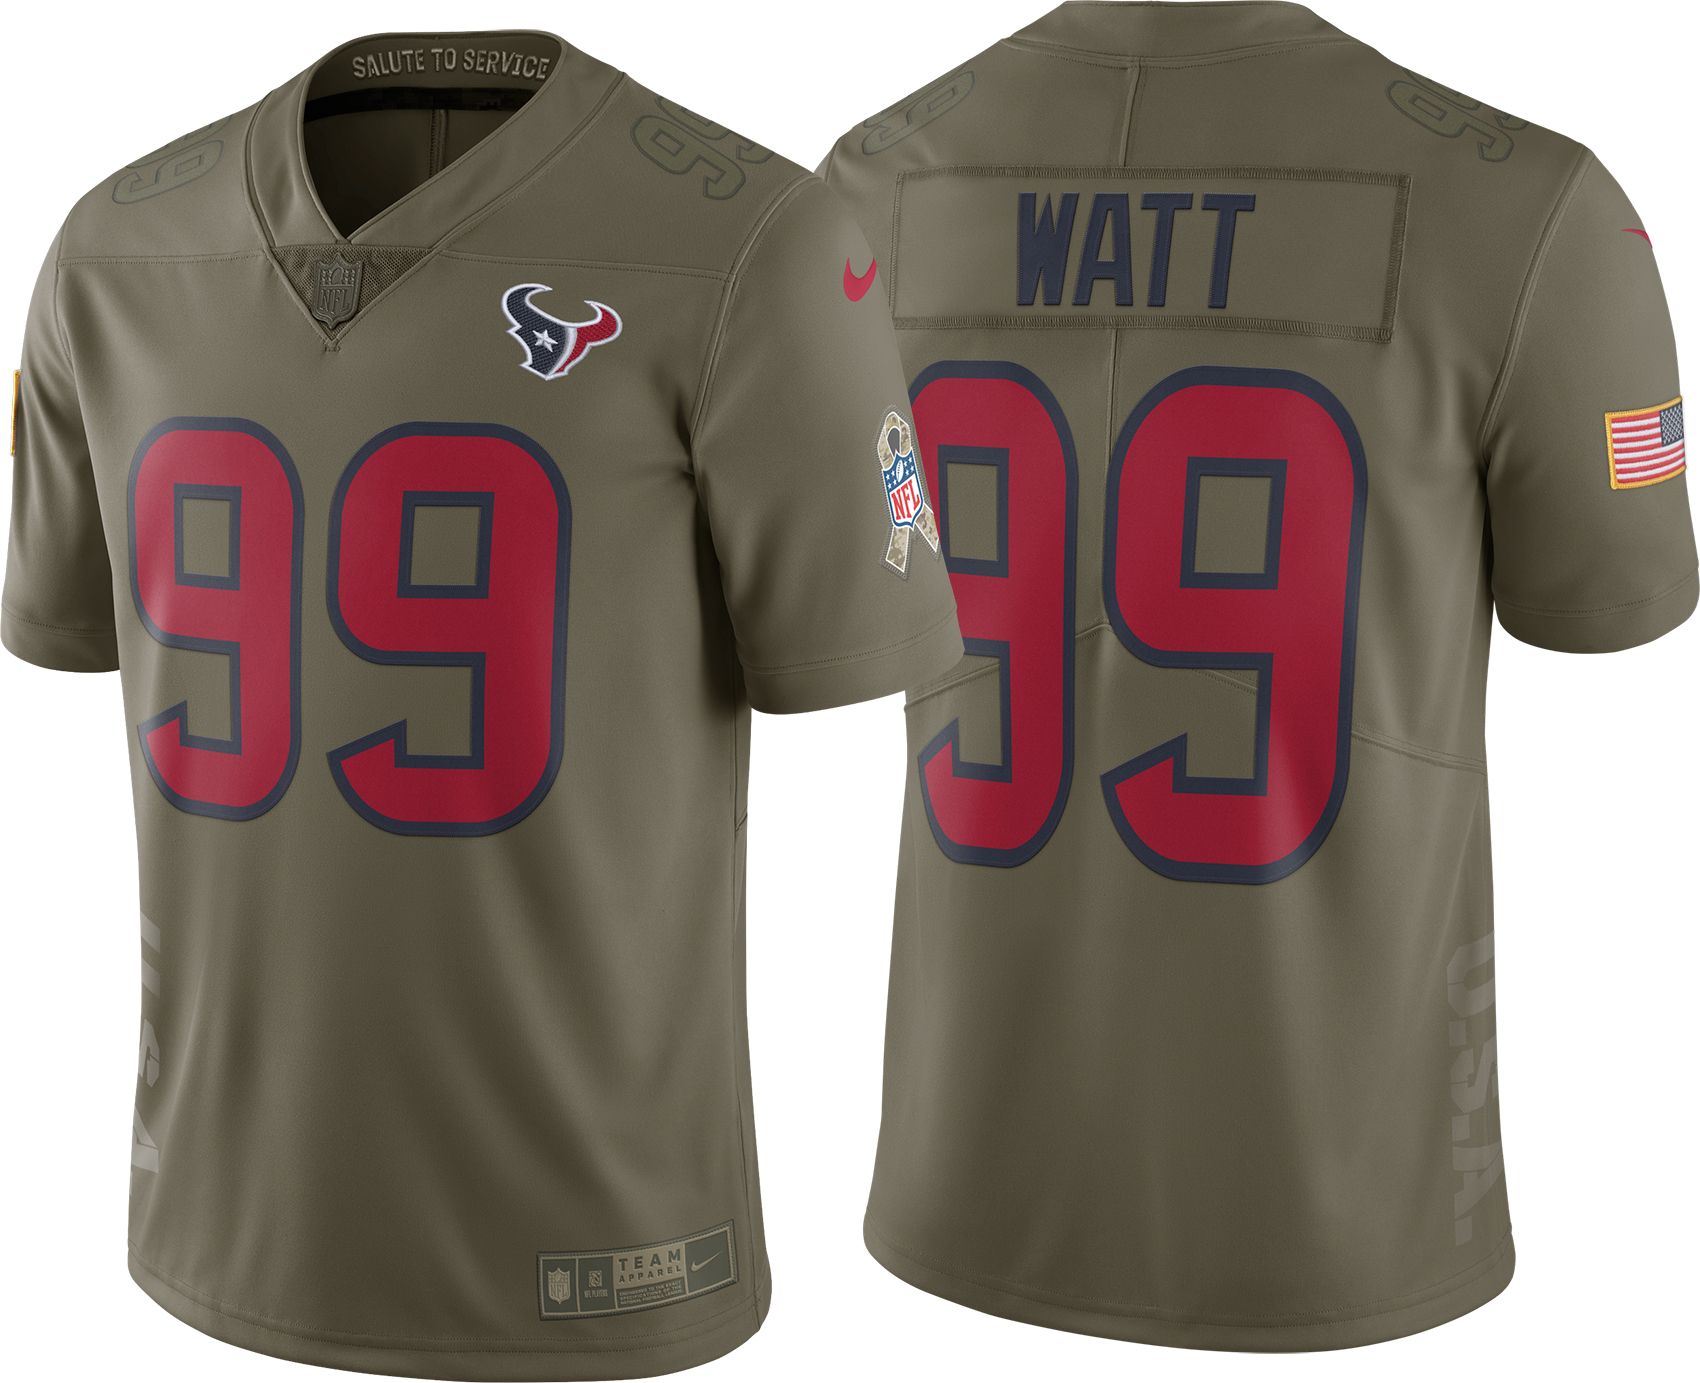 texans salute to service jersey online -